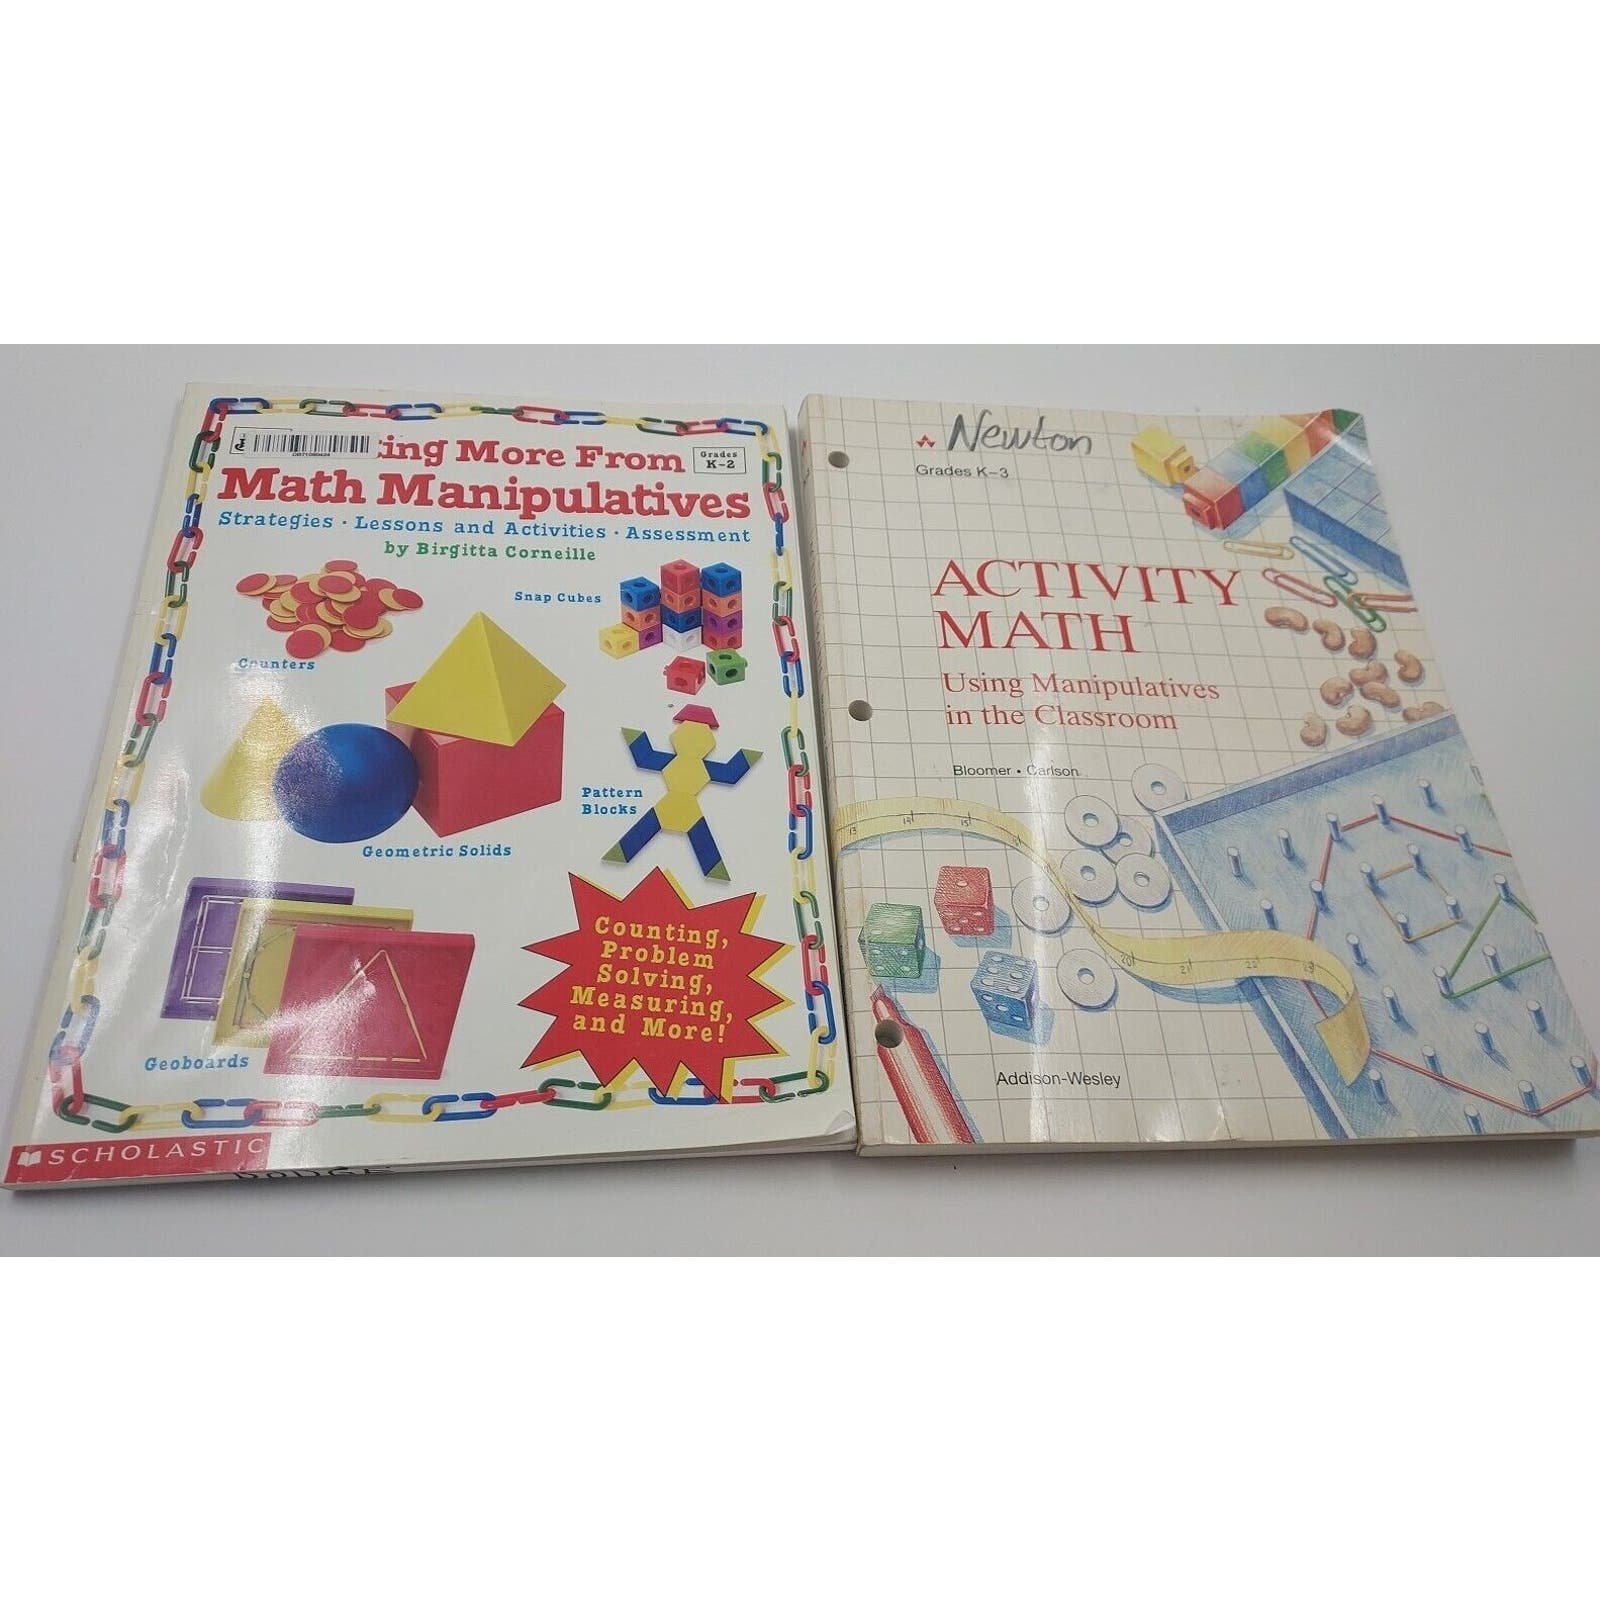 Activity Math Using Manipulatives in the Classroom & Getting More From Math Mani FKI0n36GZ